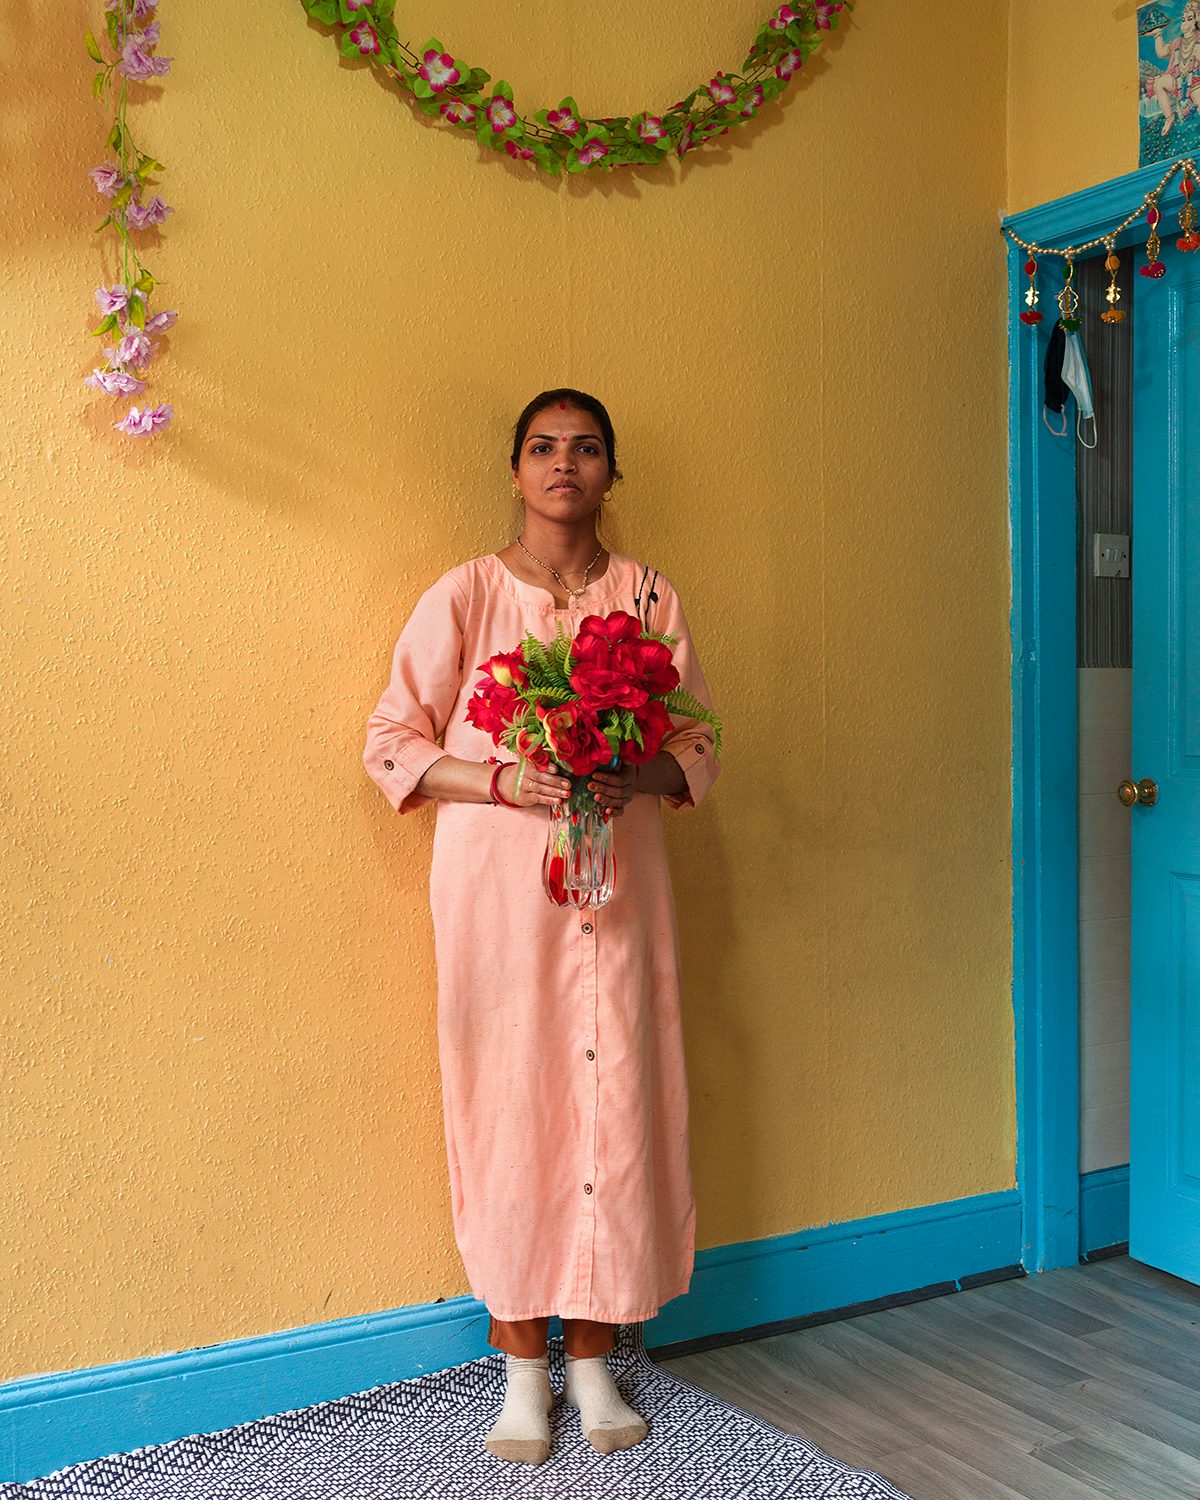 Image shows a person wearing a pink outfit holding a bouquet of flowers, taken from Kavi Pujara's book This Golden Mile